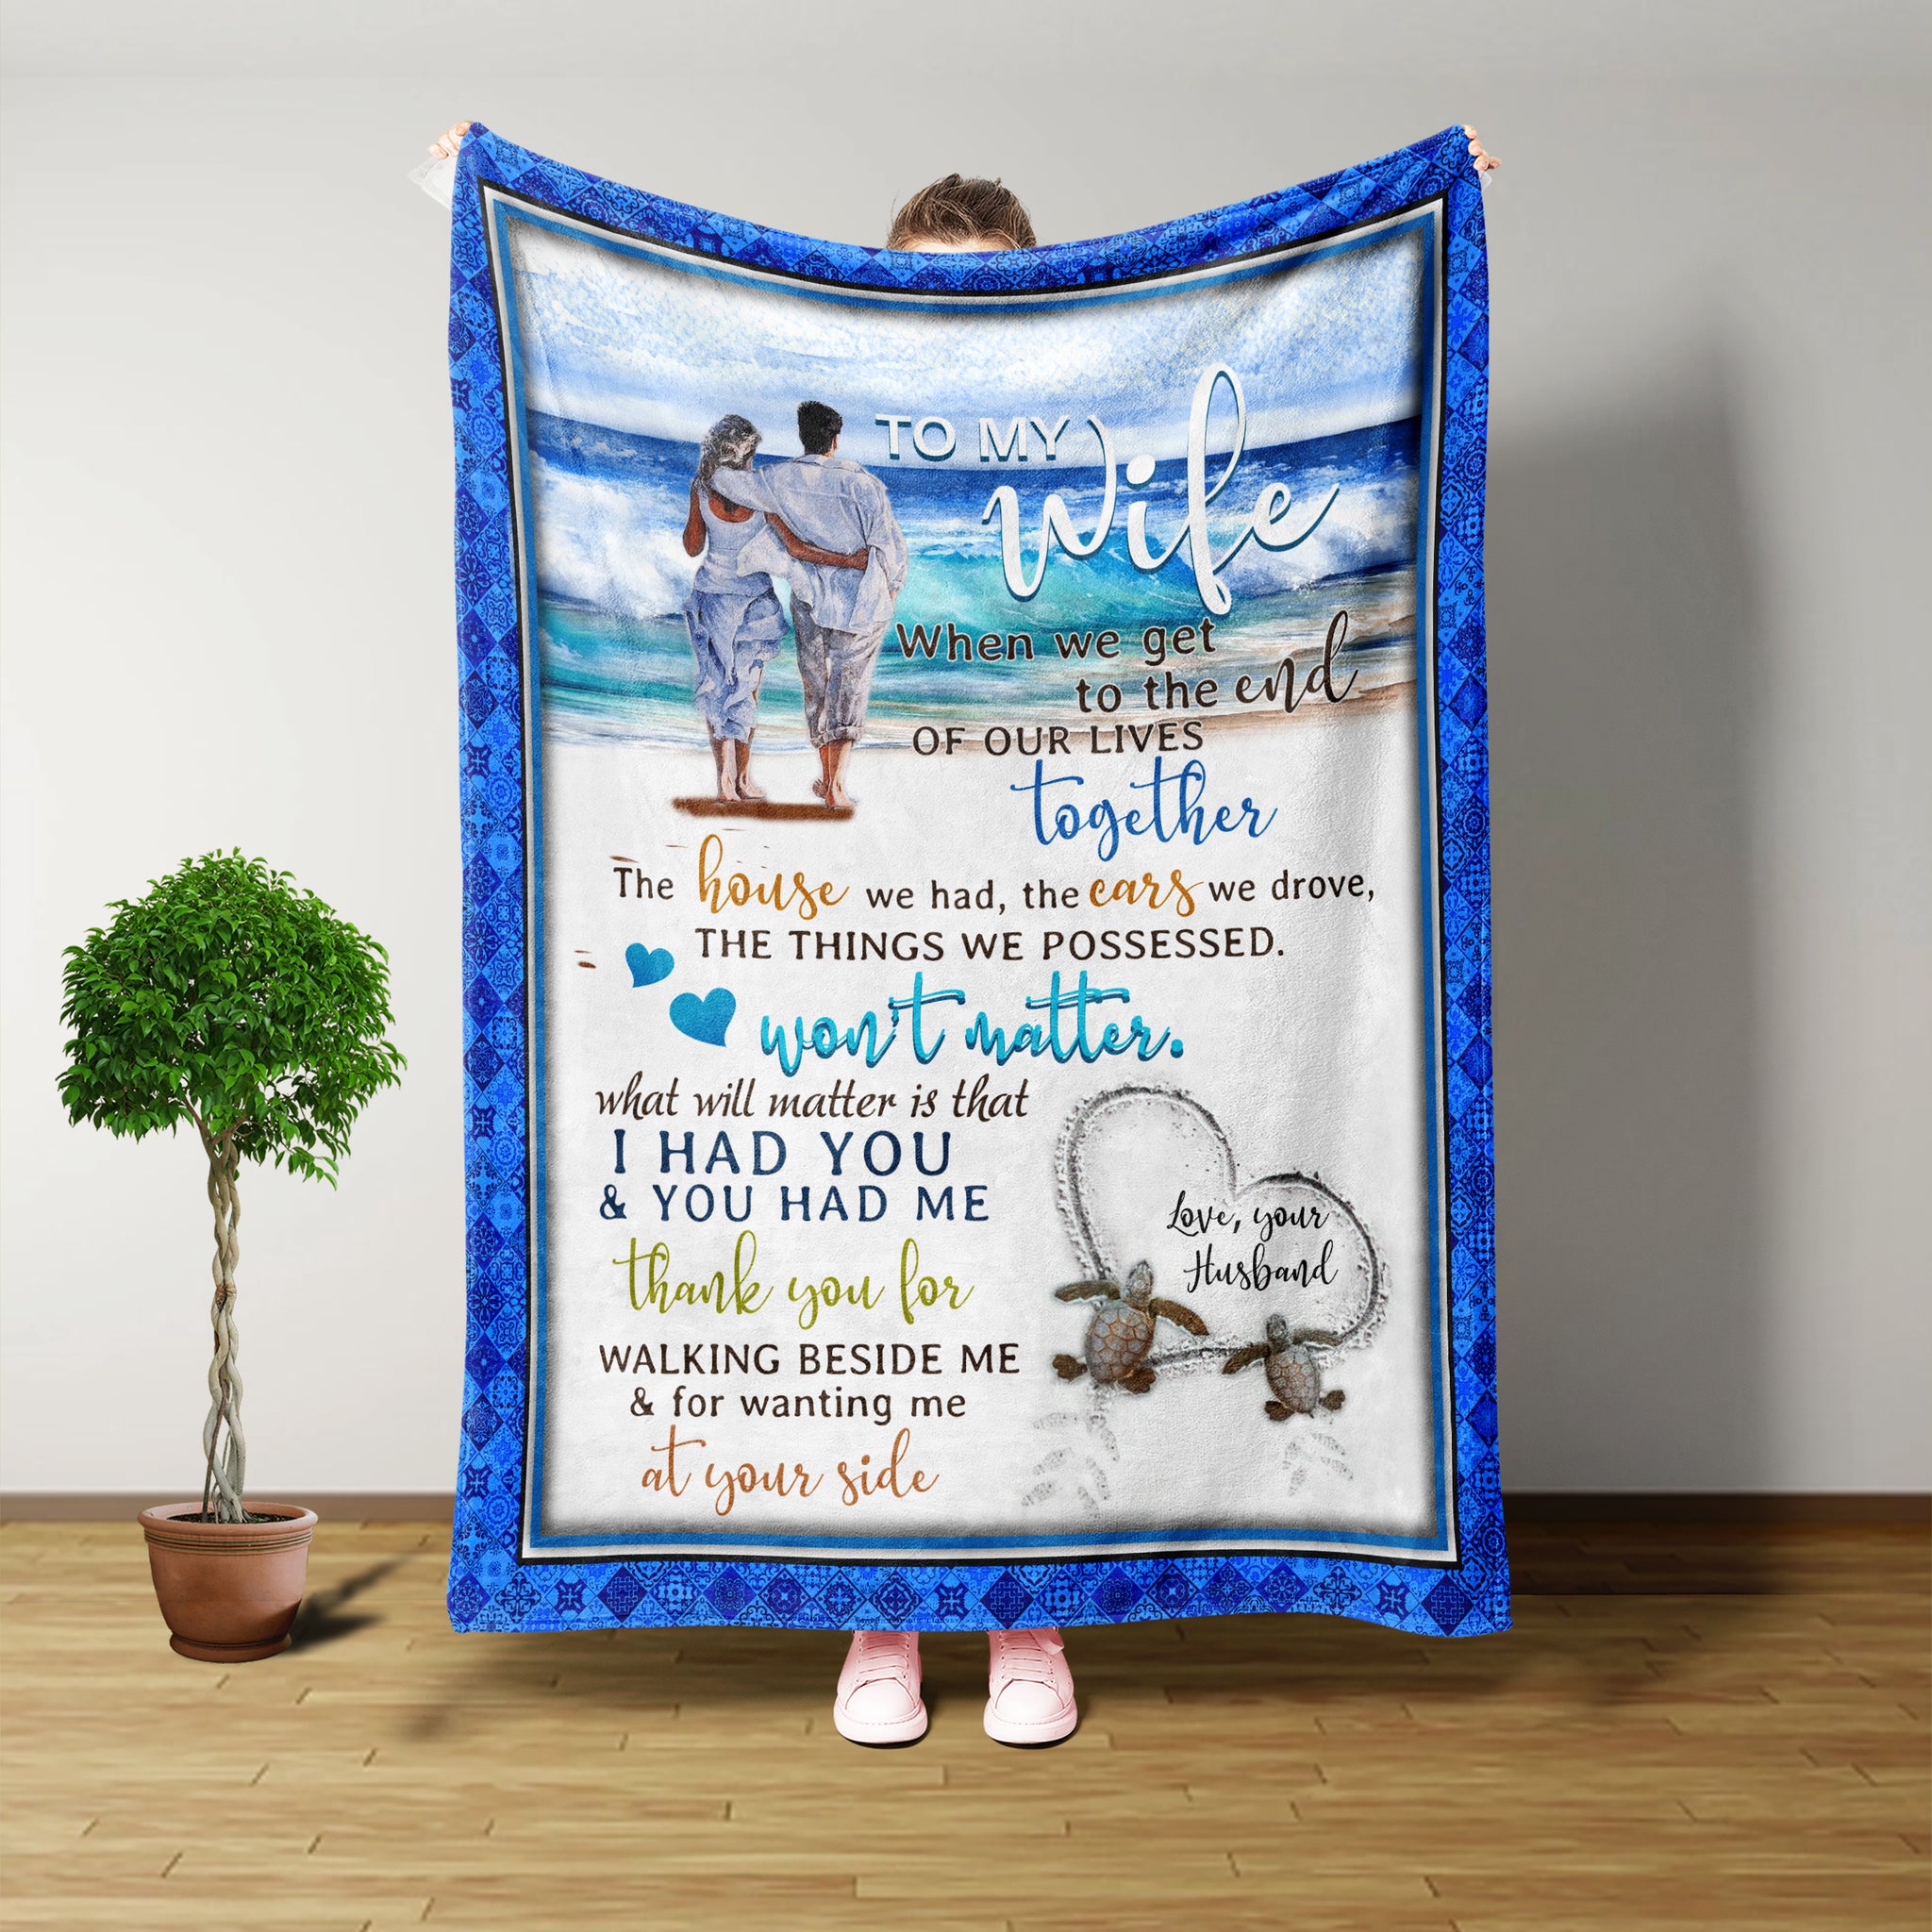 Personalised Blanket, To My Wife Blanket, Husband And Wife Quotes, Beach View, Couple Christmas Gift Ideas, Wedding Gifts, Throw Blanket